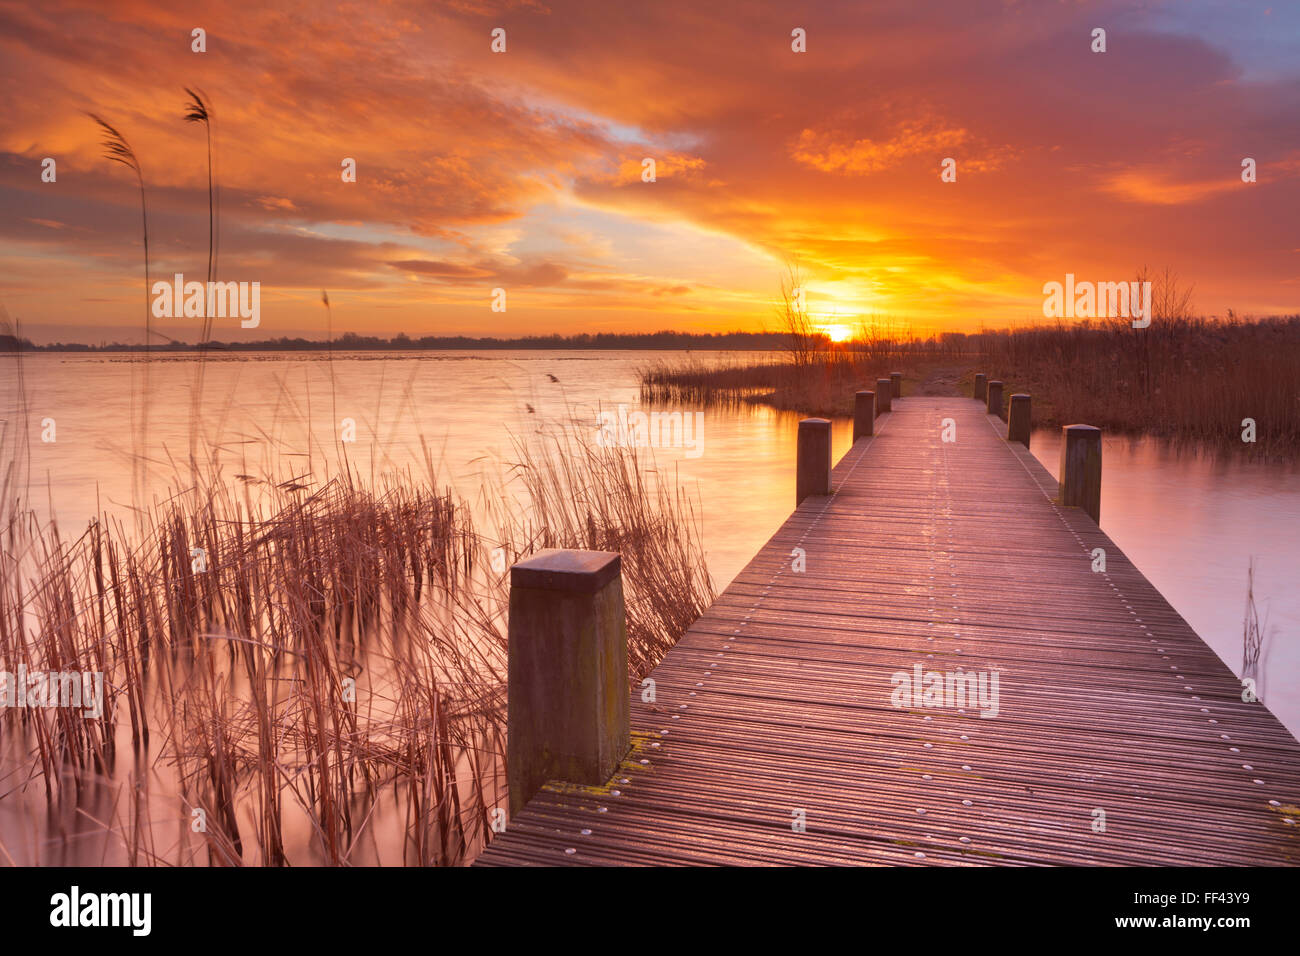 Spectacular sunrise over a lake near Amsterdam in The Netherlands. Stock Photo